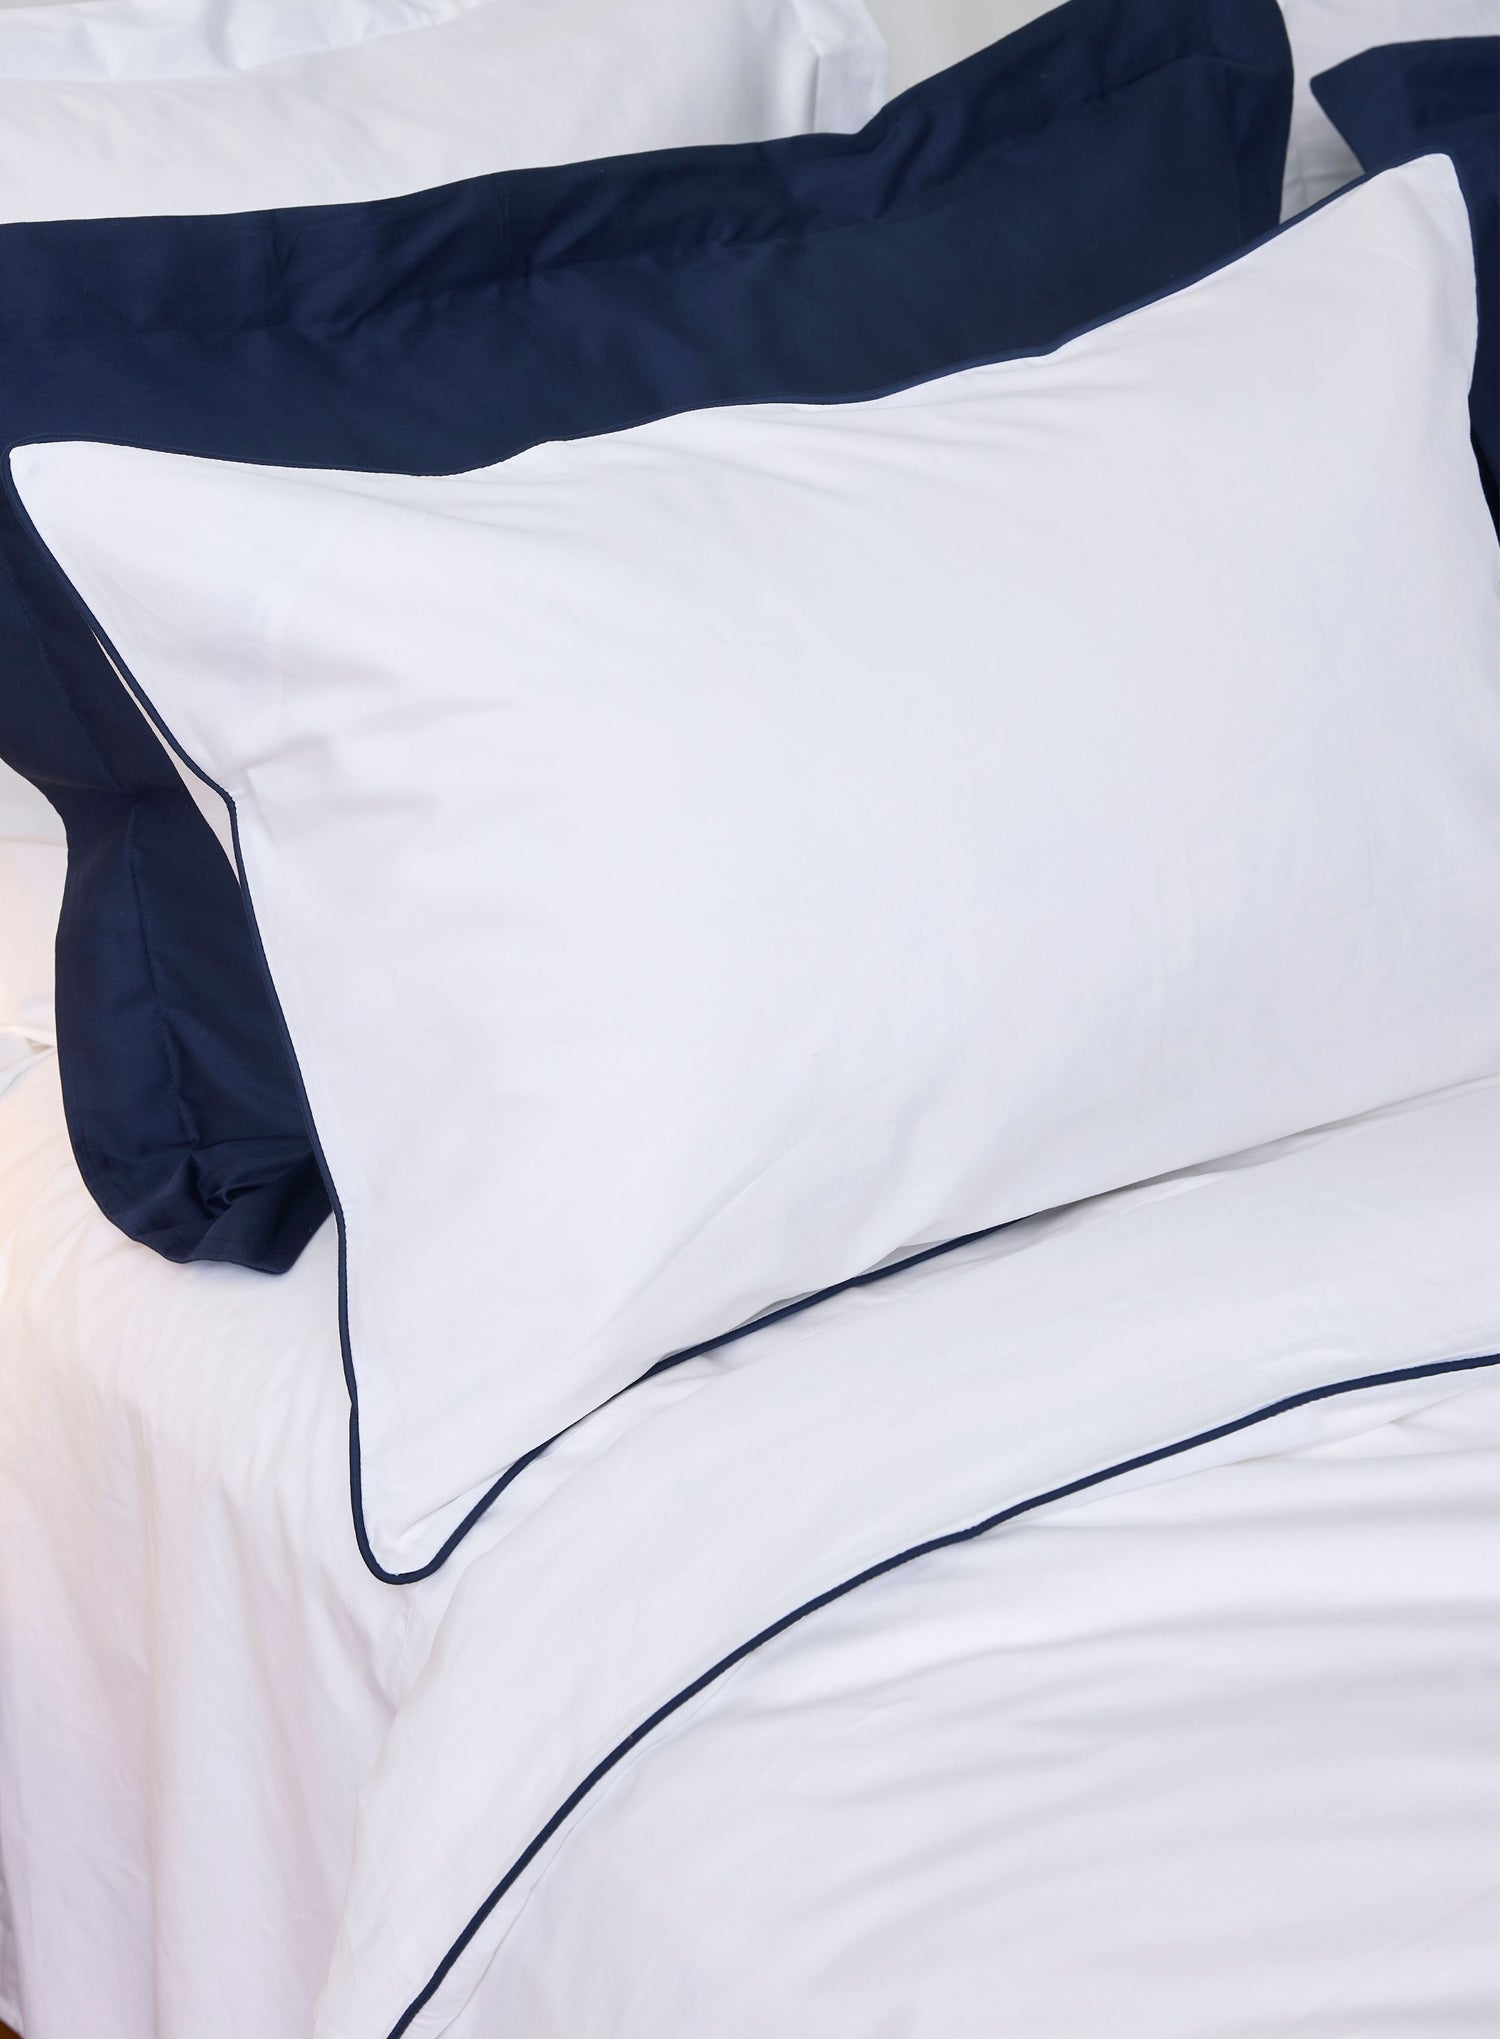 Pillowcase Pair - Piped Edge in Navy